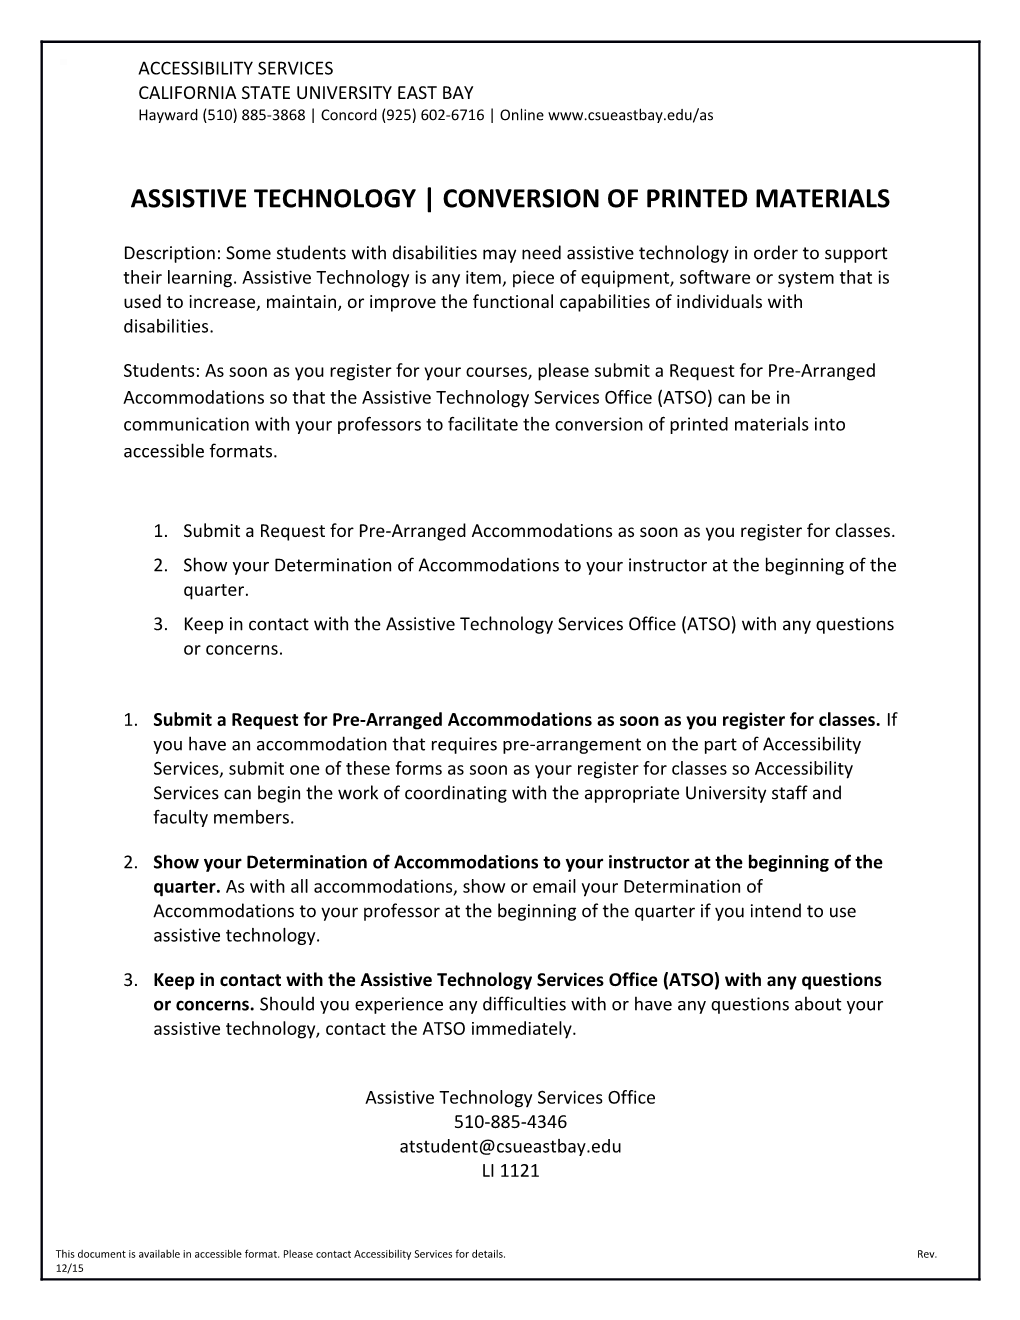 Assistive Technology Conversion of Printed Materials